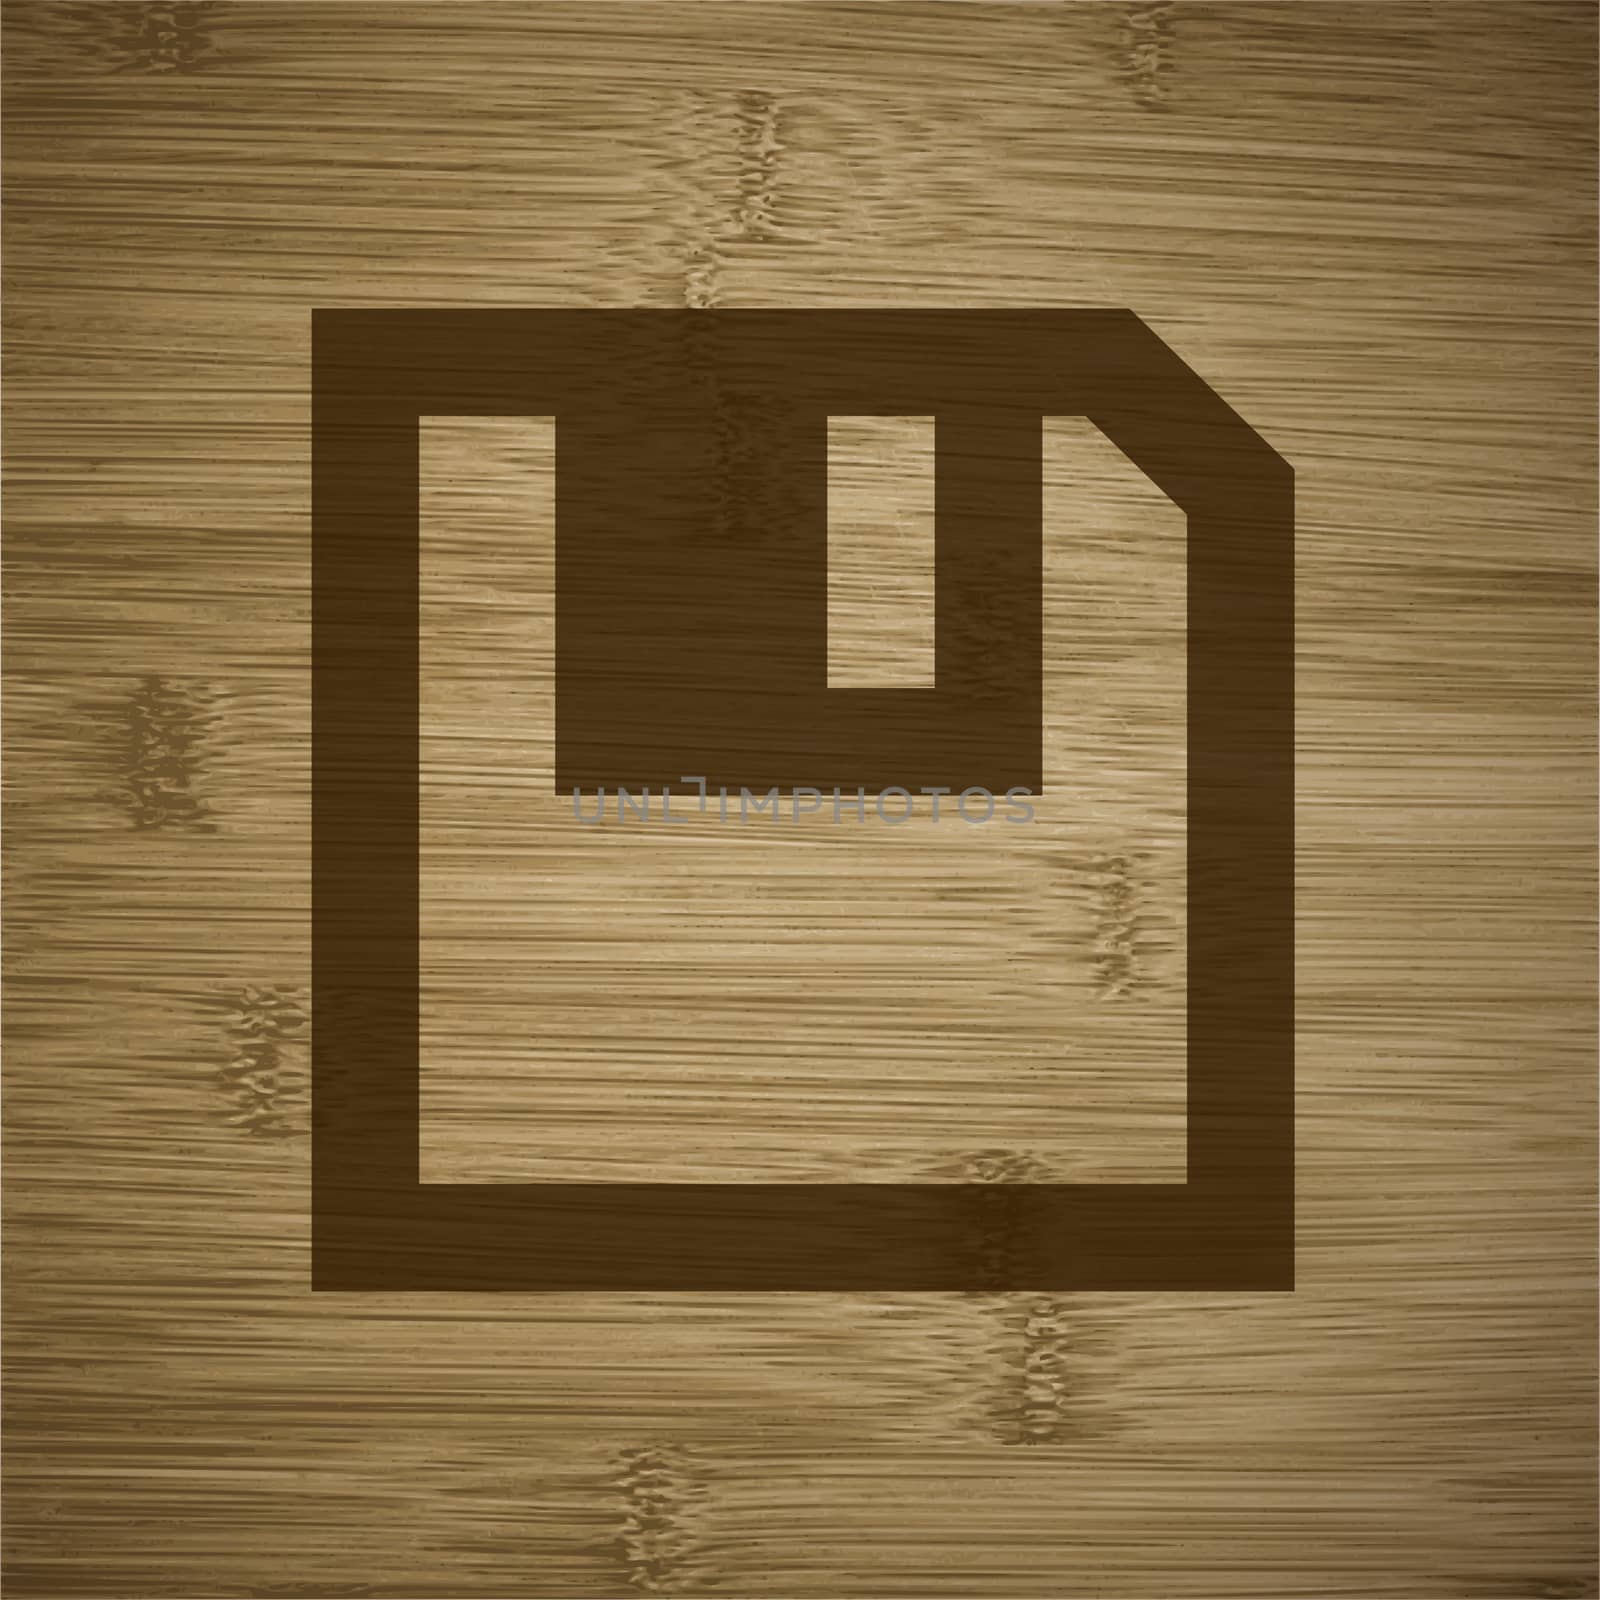 floppy disk icon Flat with abstract background.